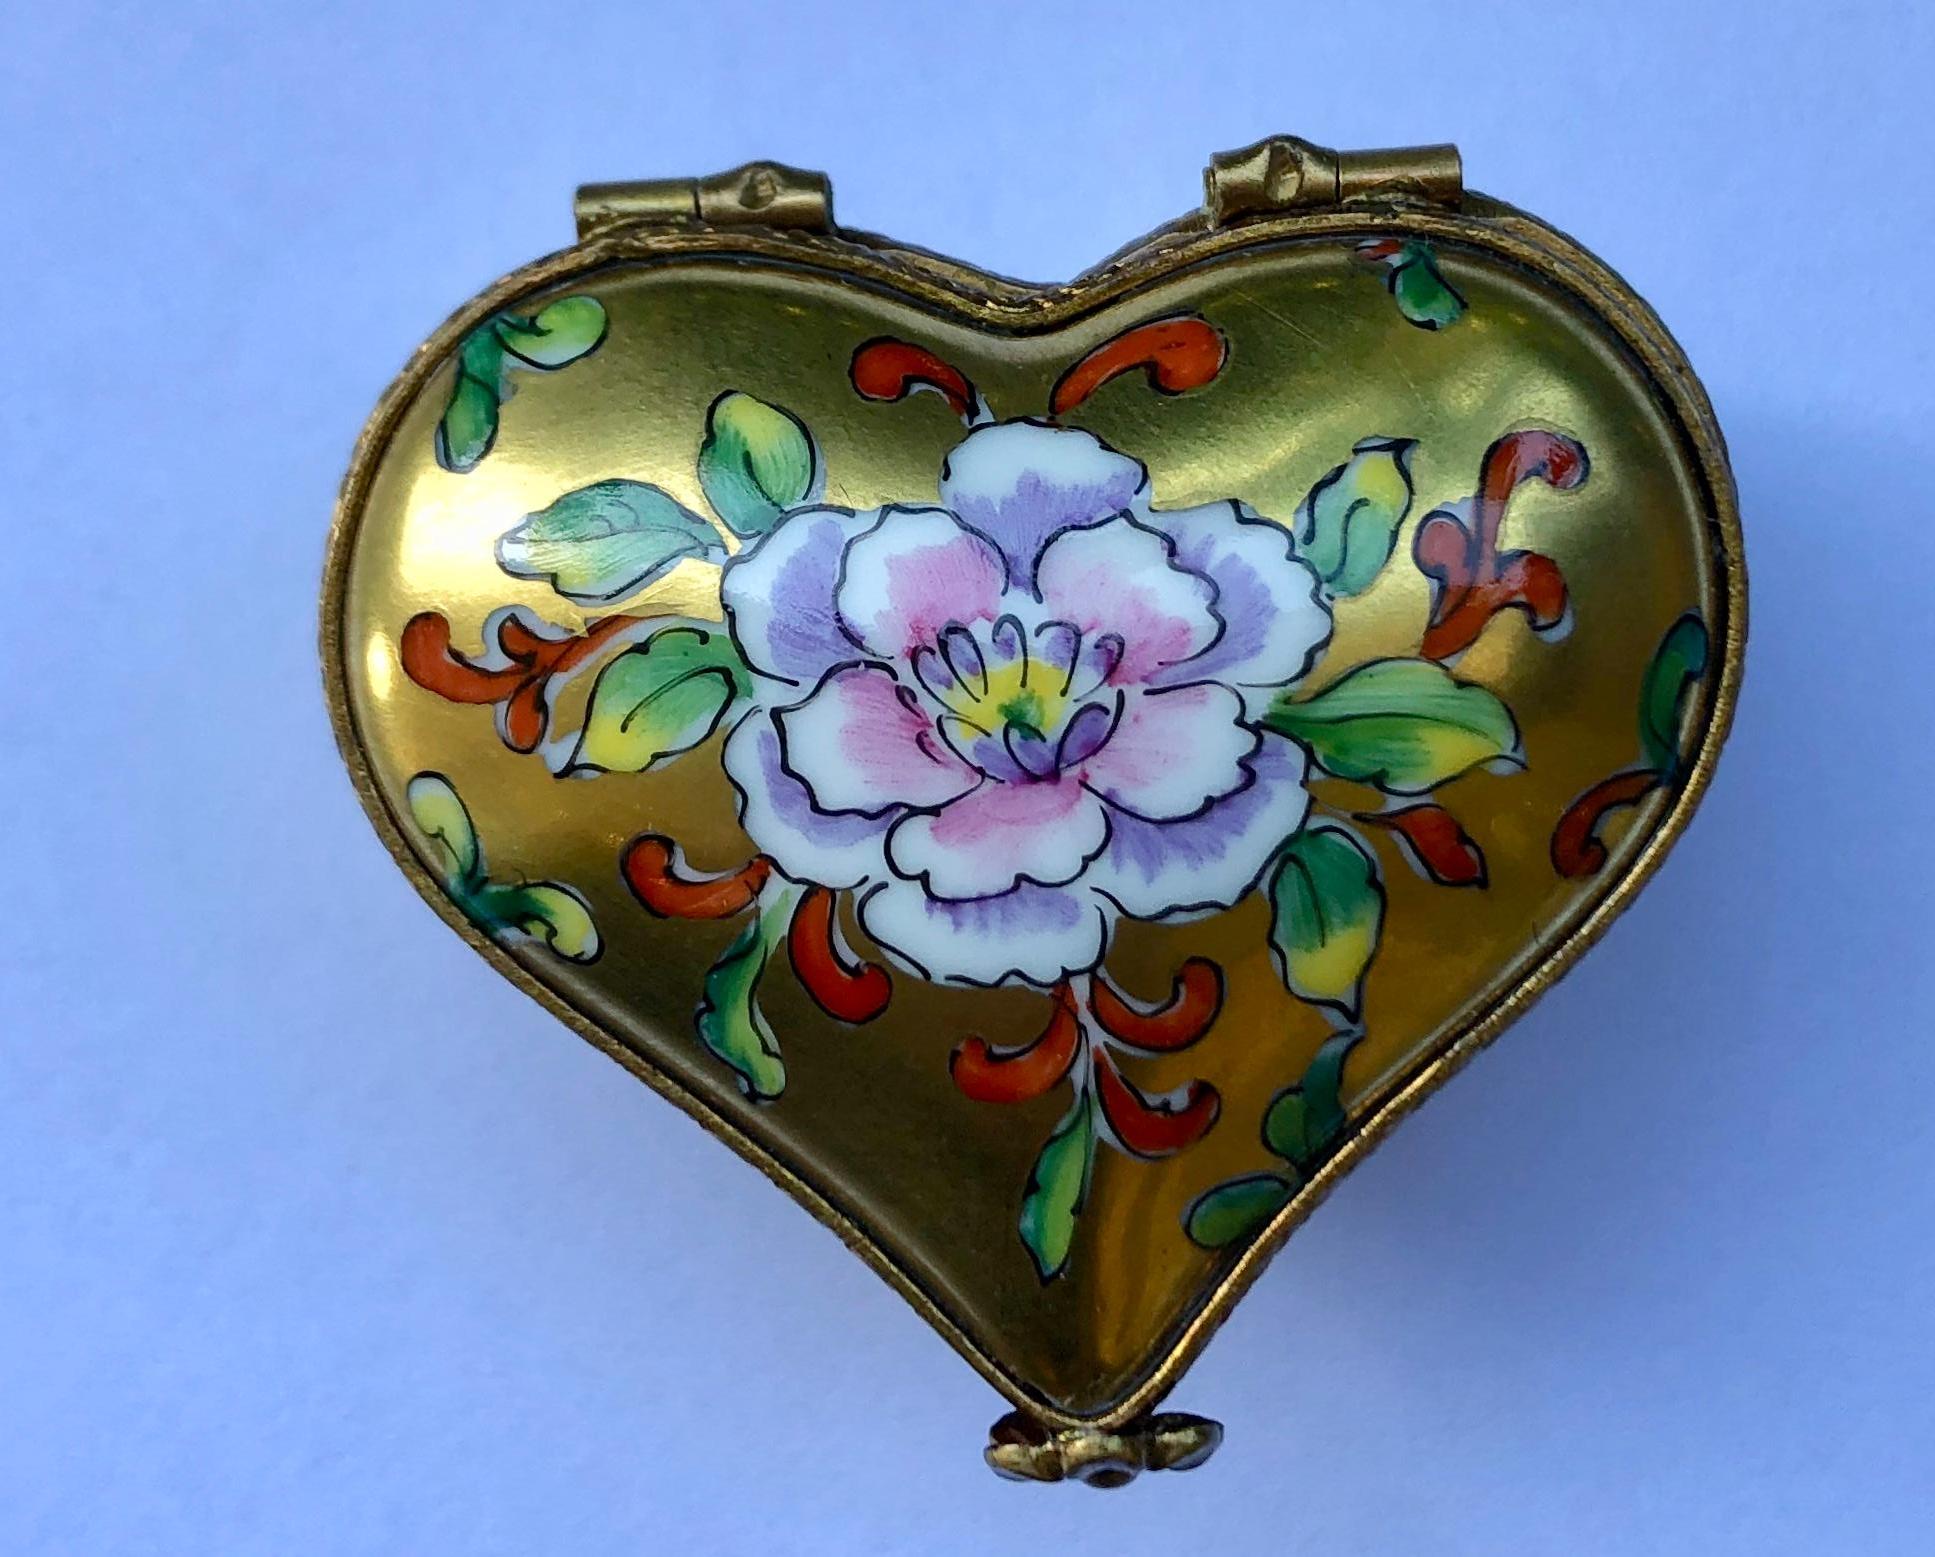 Collectible handmade and hand painted Limoges porcelain miniature heart shaped trinket box features an opulent 24 karat gold exterior decorated with an exquisitely detailed and colorful stylized floral motif design, gold gilt metal fittings and a